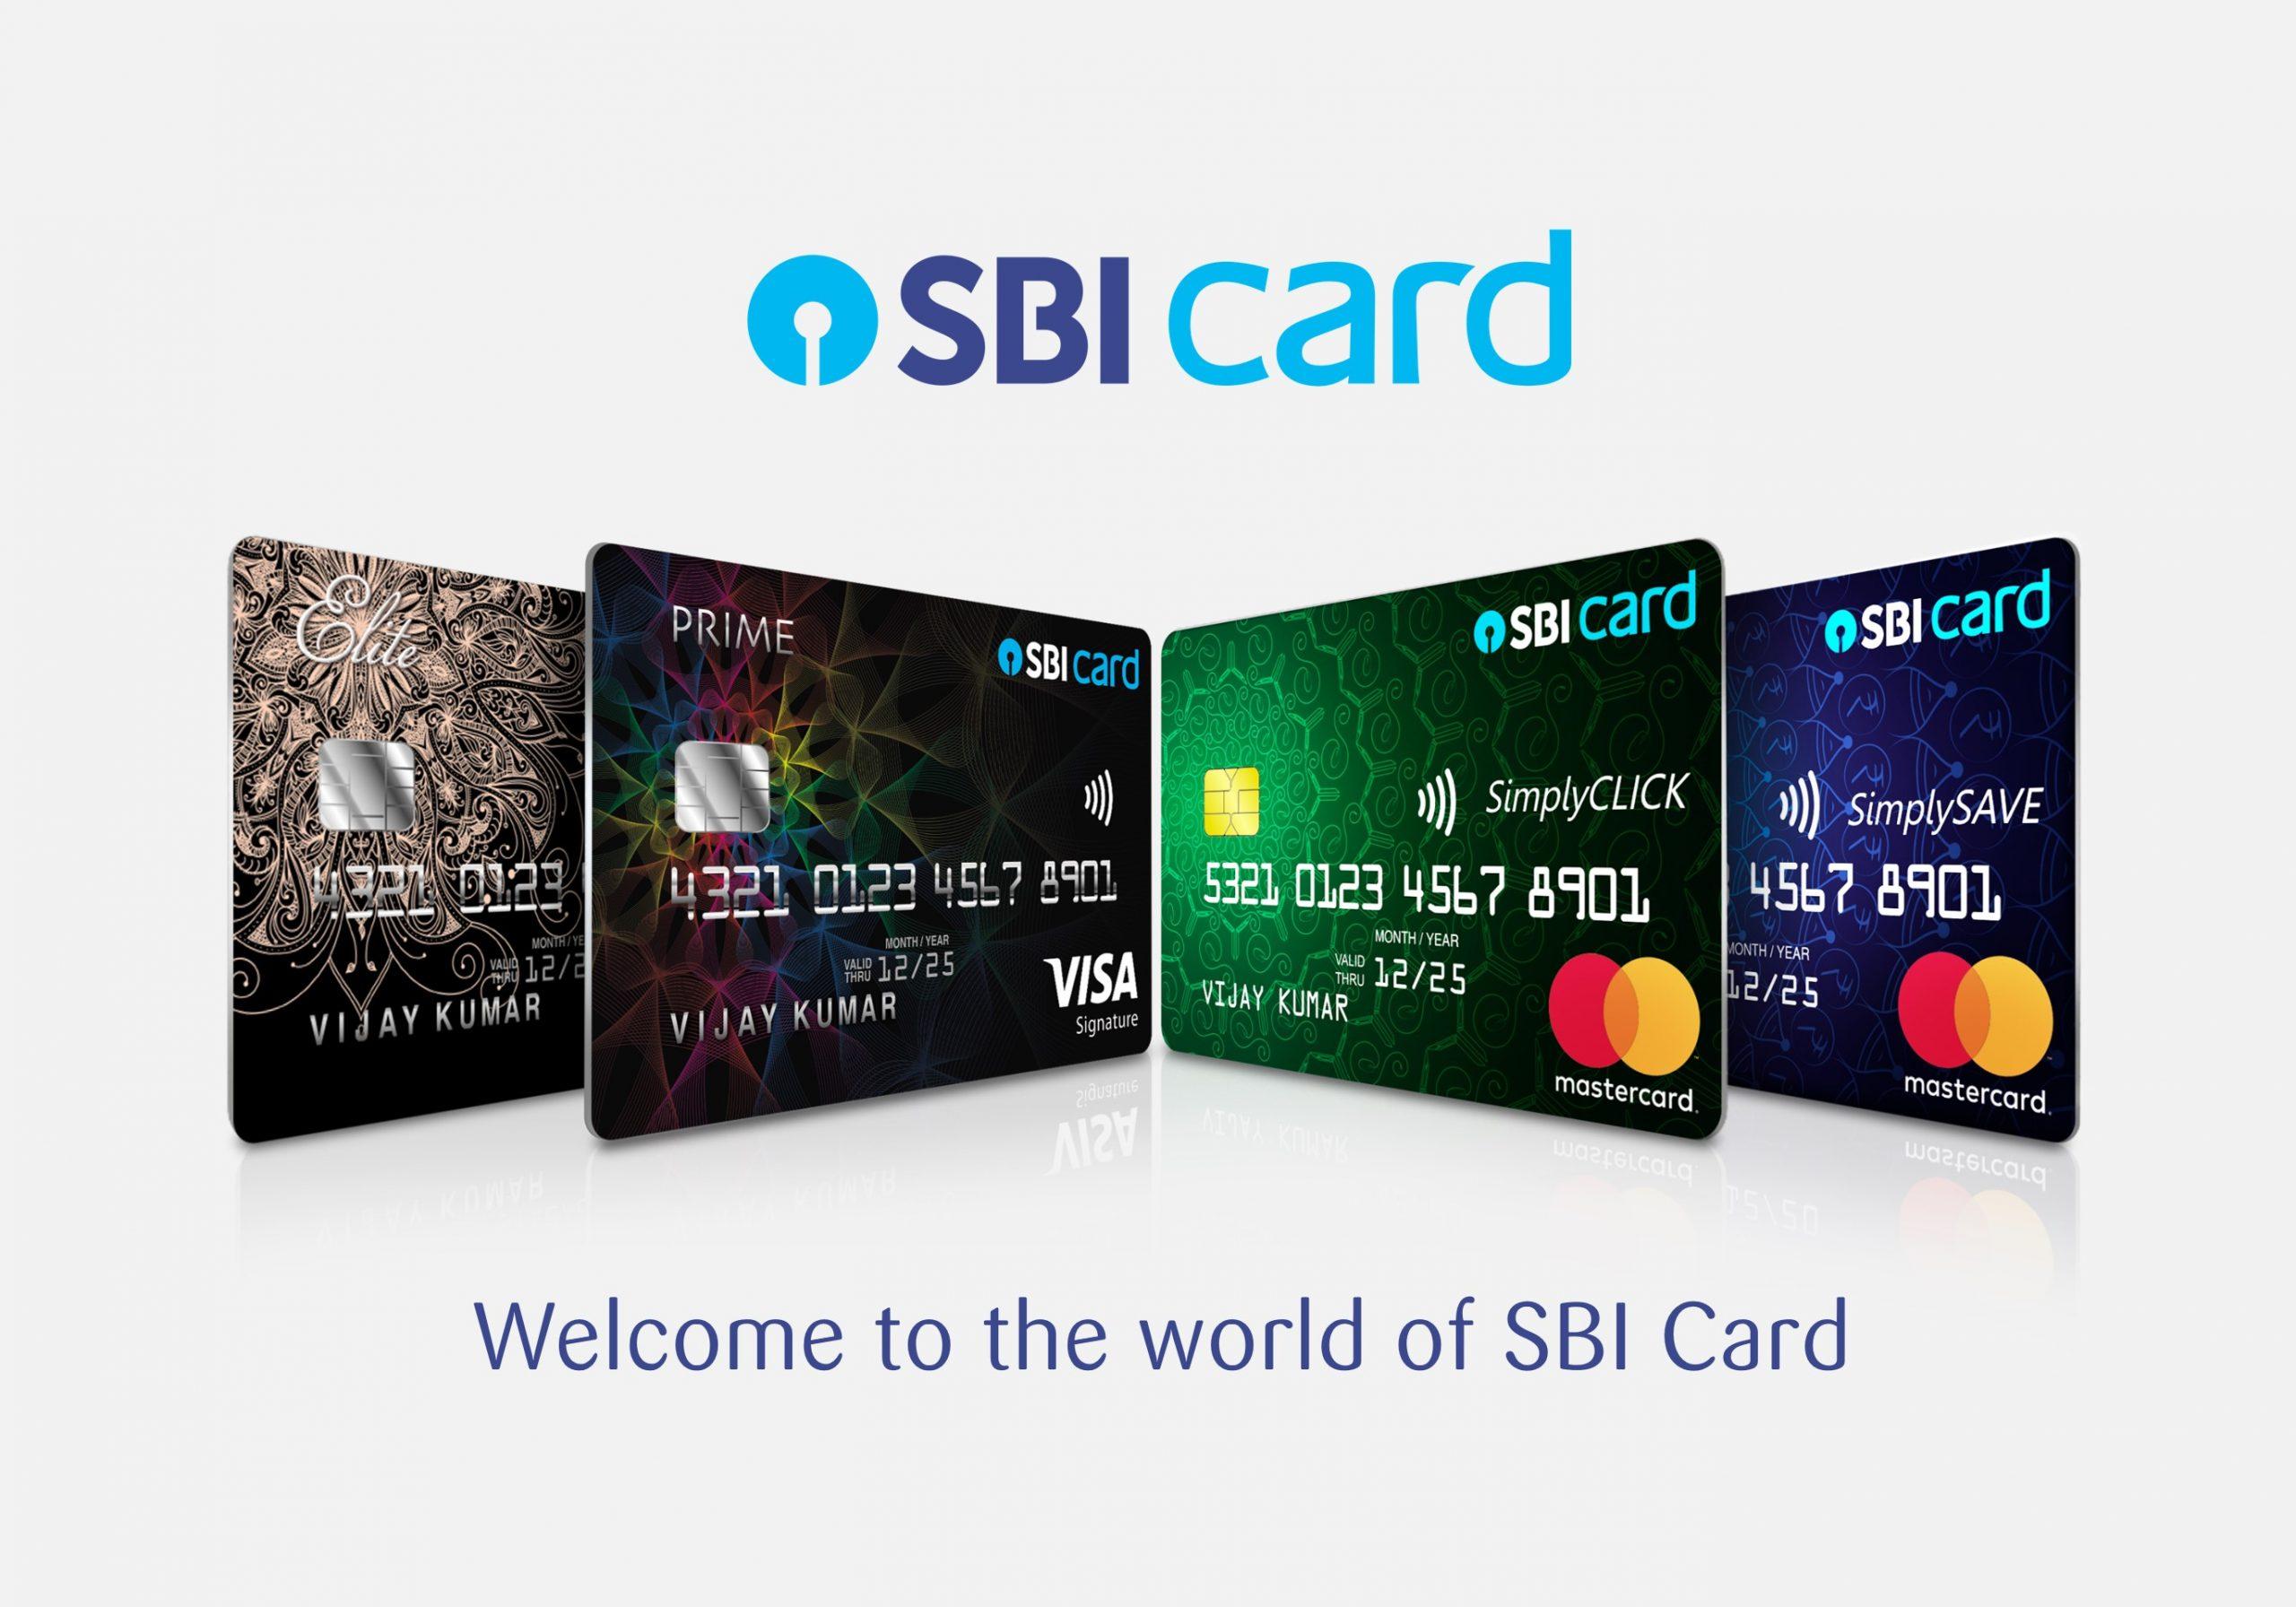 SBI Cards tie-up with TCS to boost digital transformation_50.1